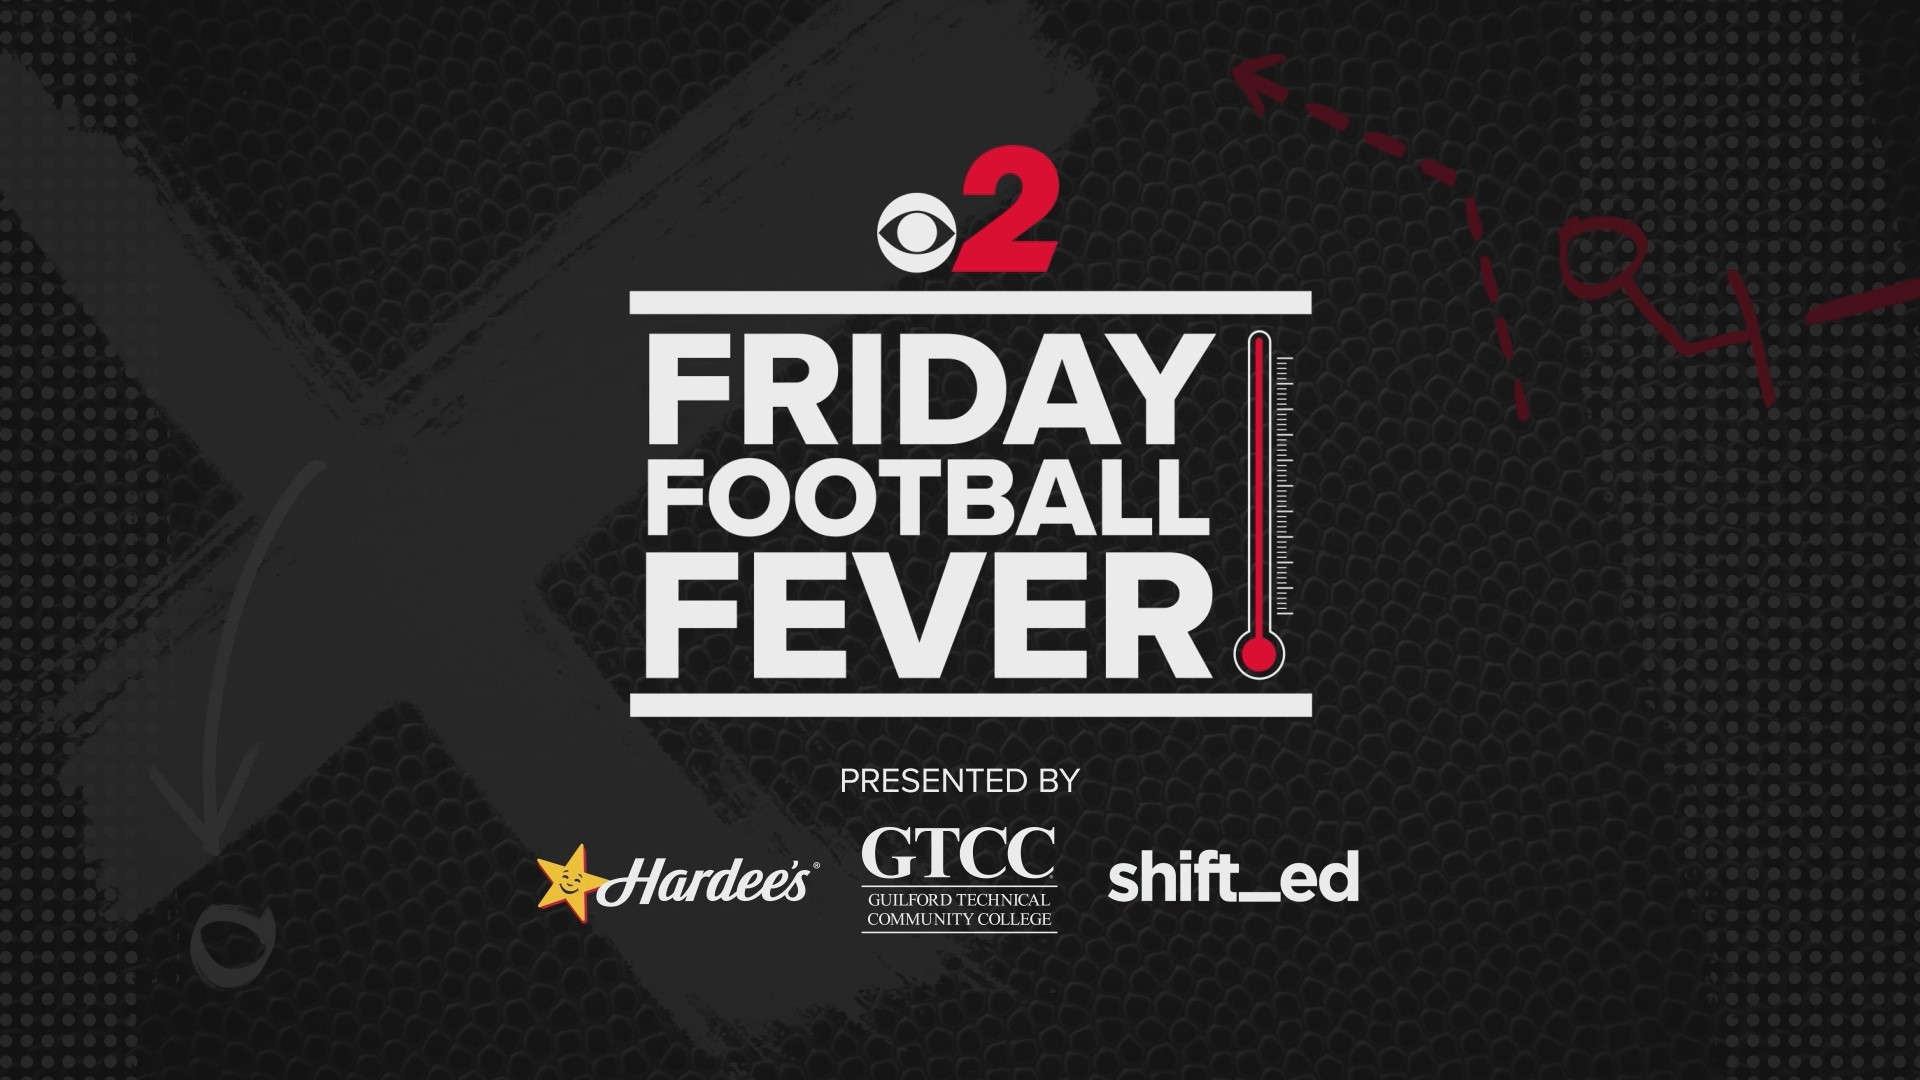 Get pumped! High school football is back! Watch Friday Football Fever on WFMY News 2.